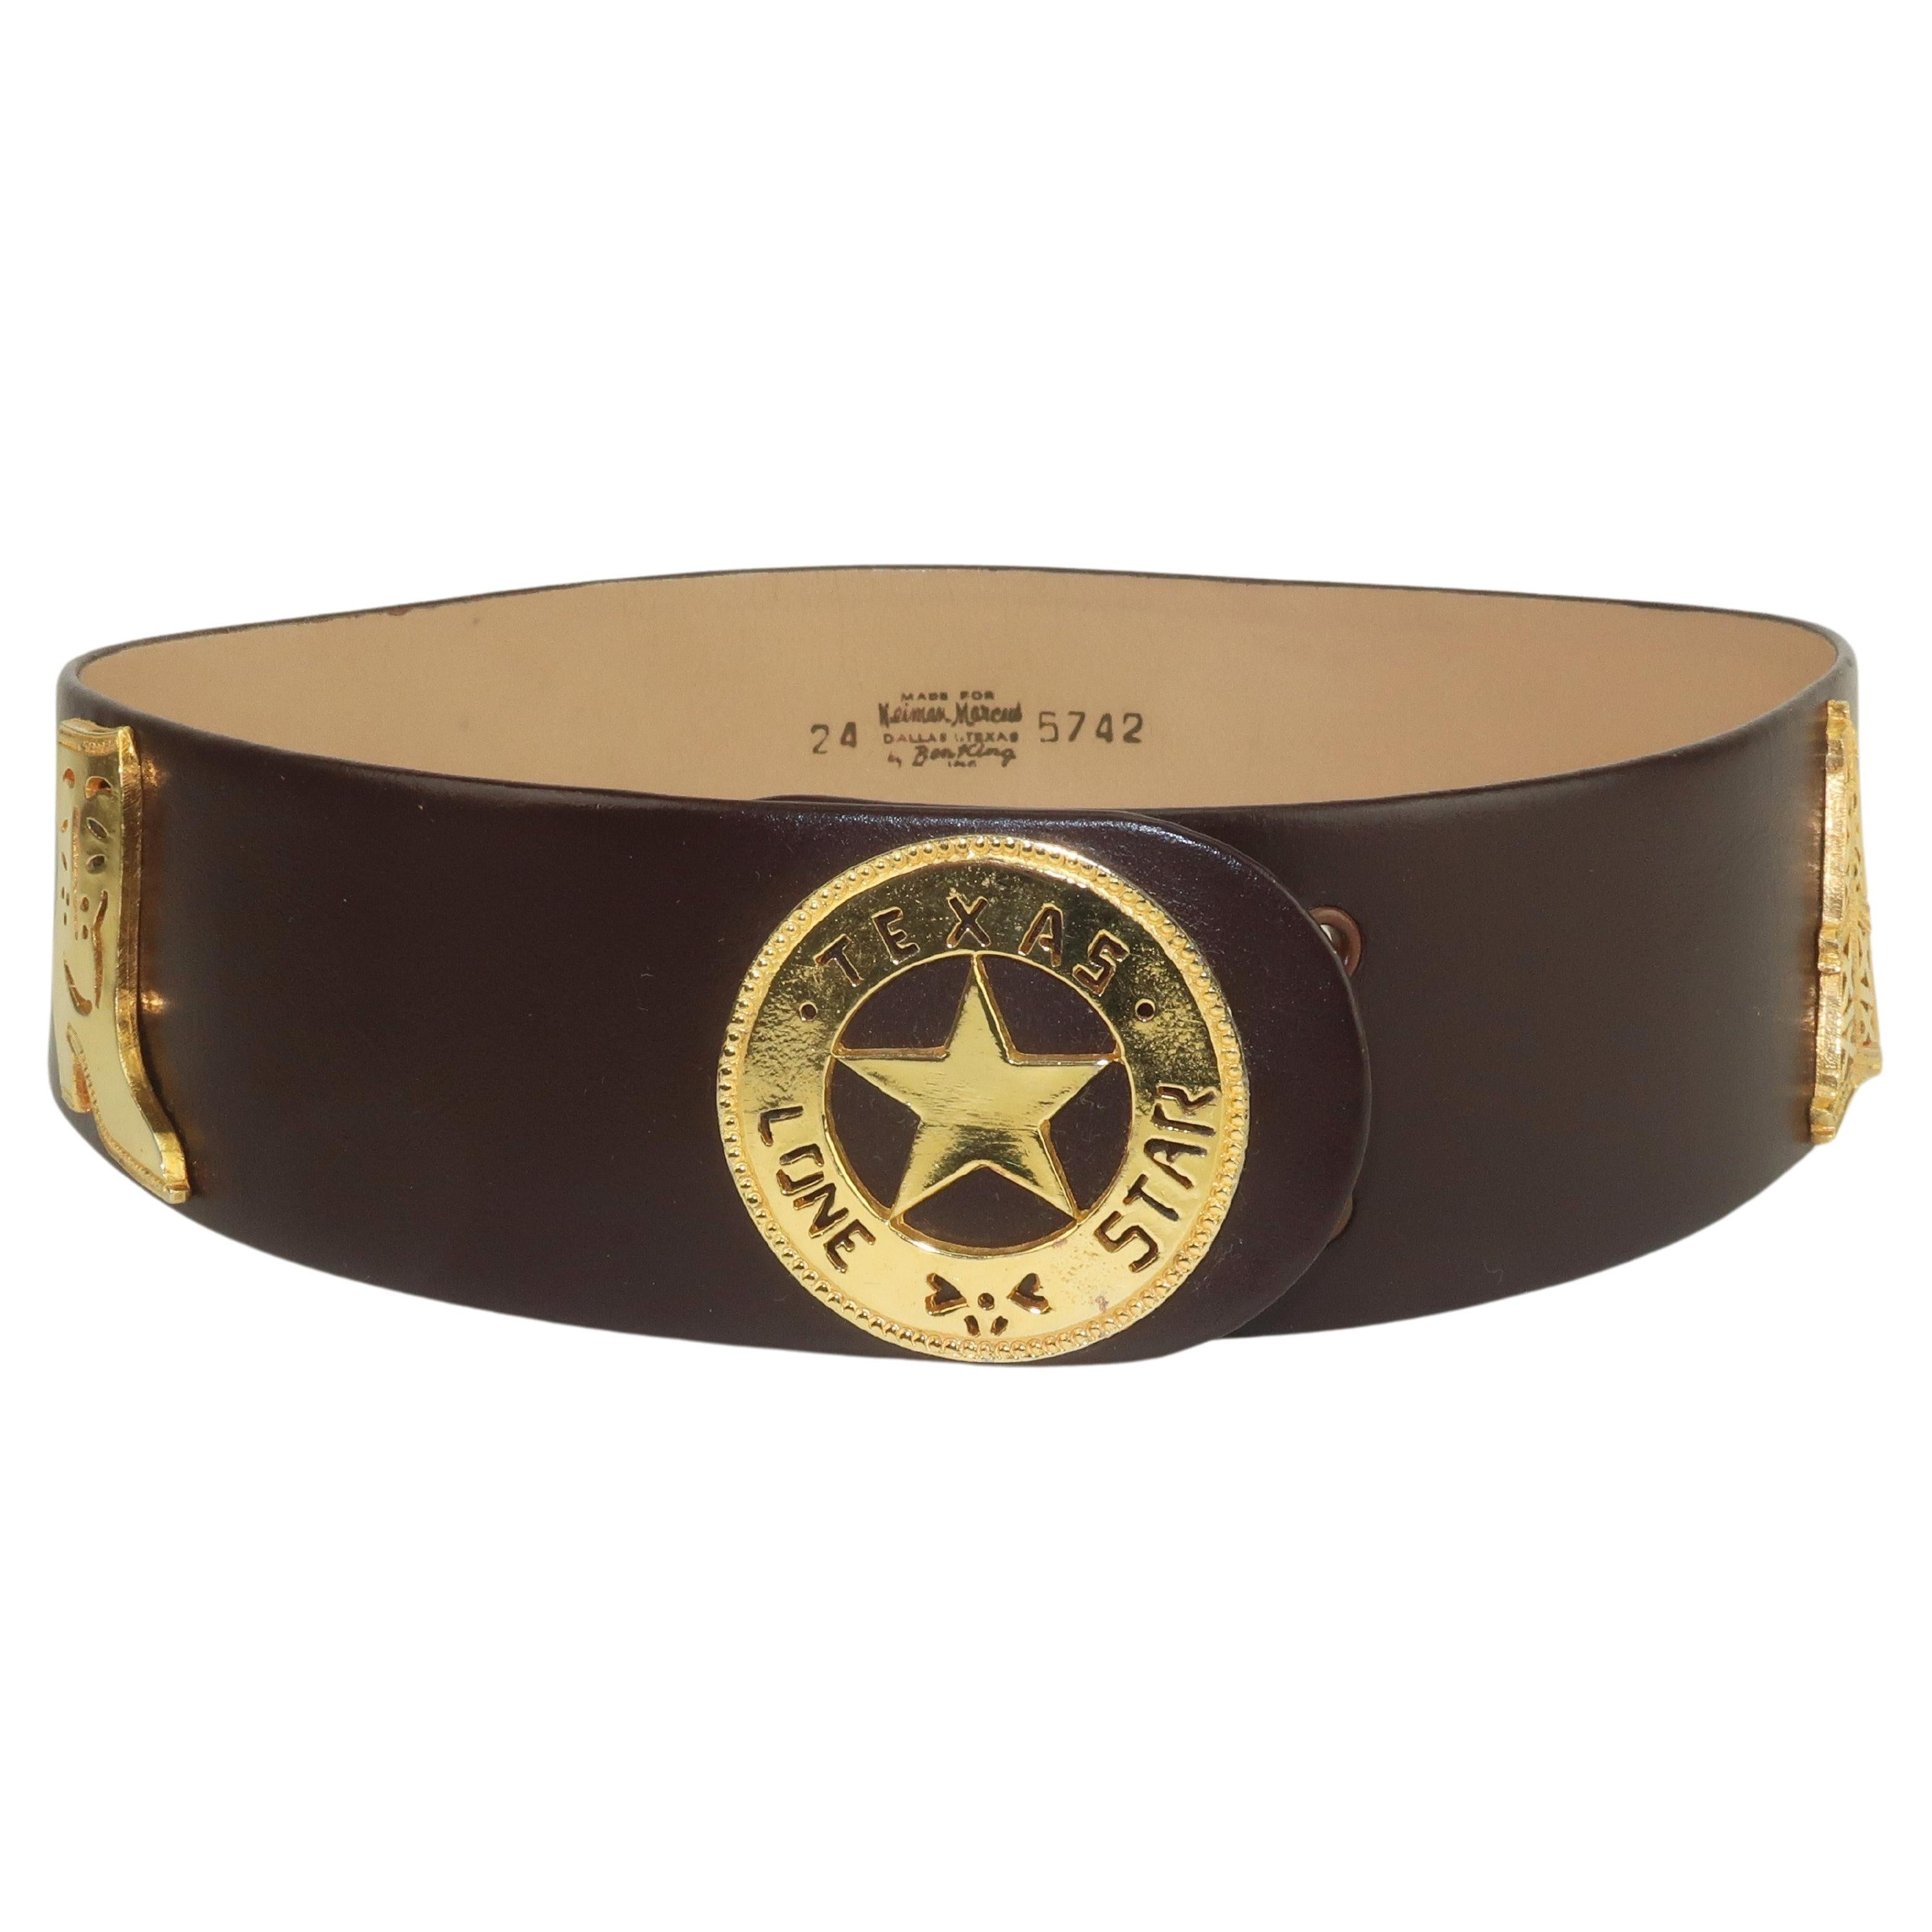 Neiman Marcus Texas Novelty Brown Leather Belt, 1960's For Sale